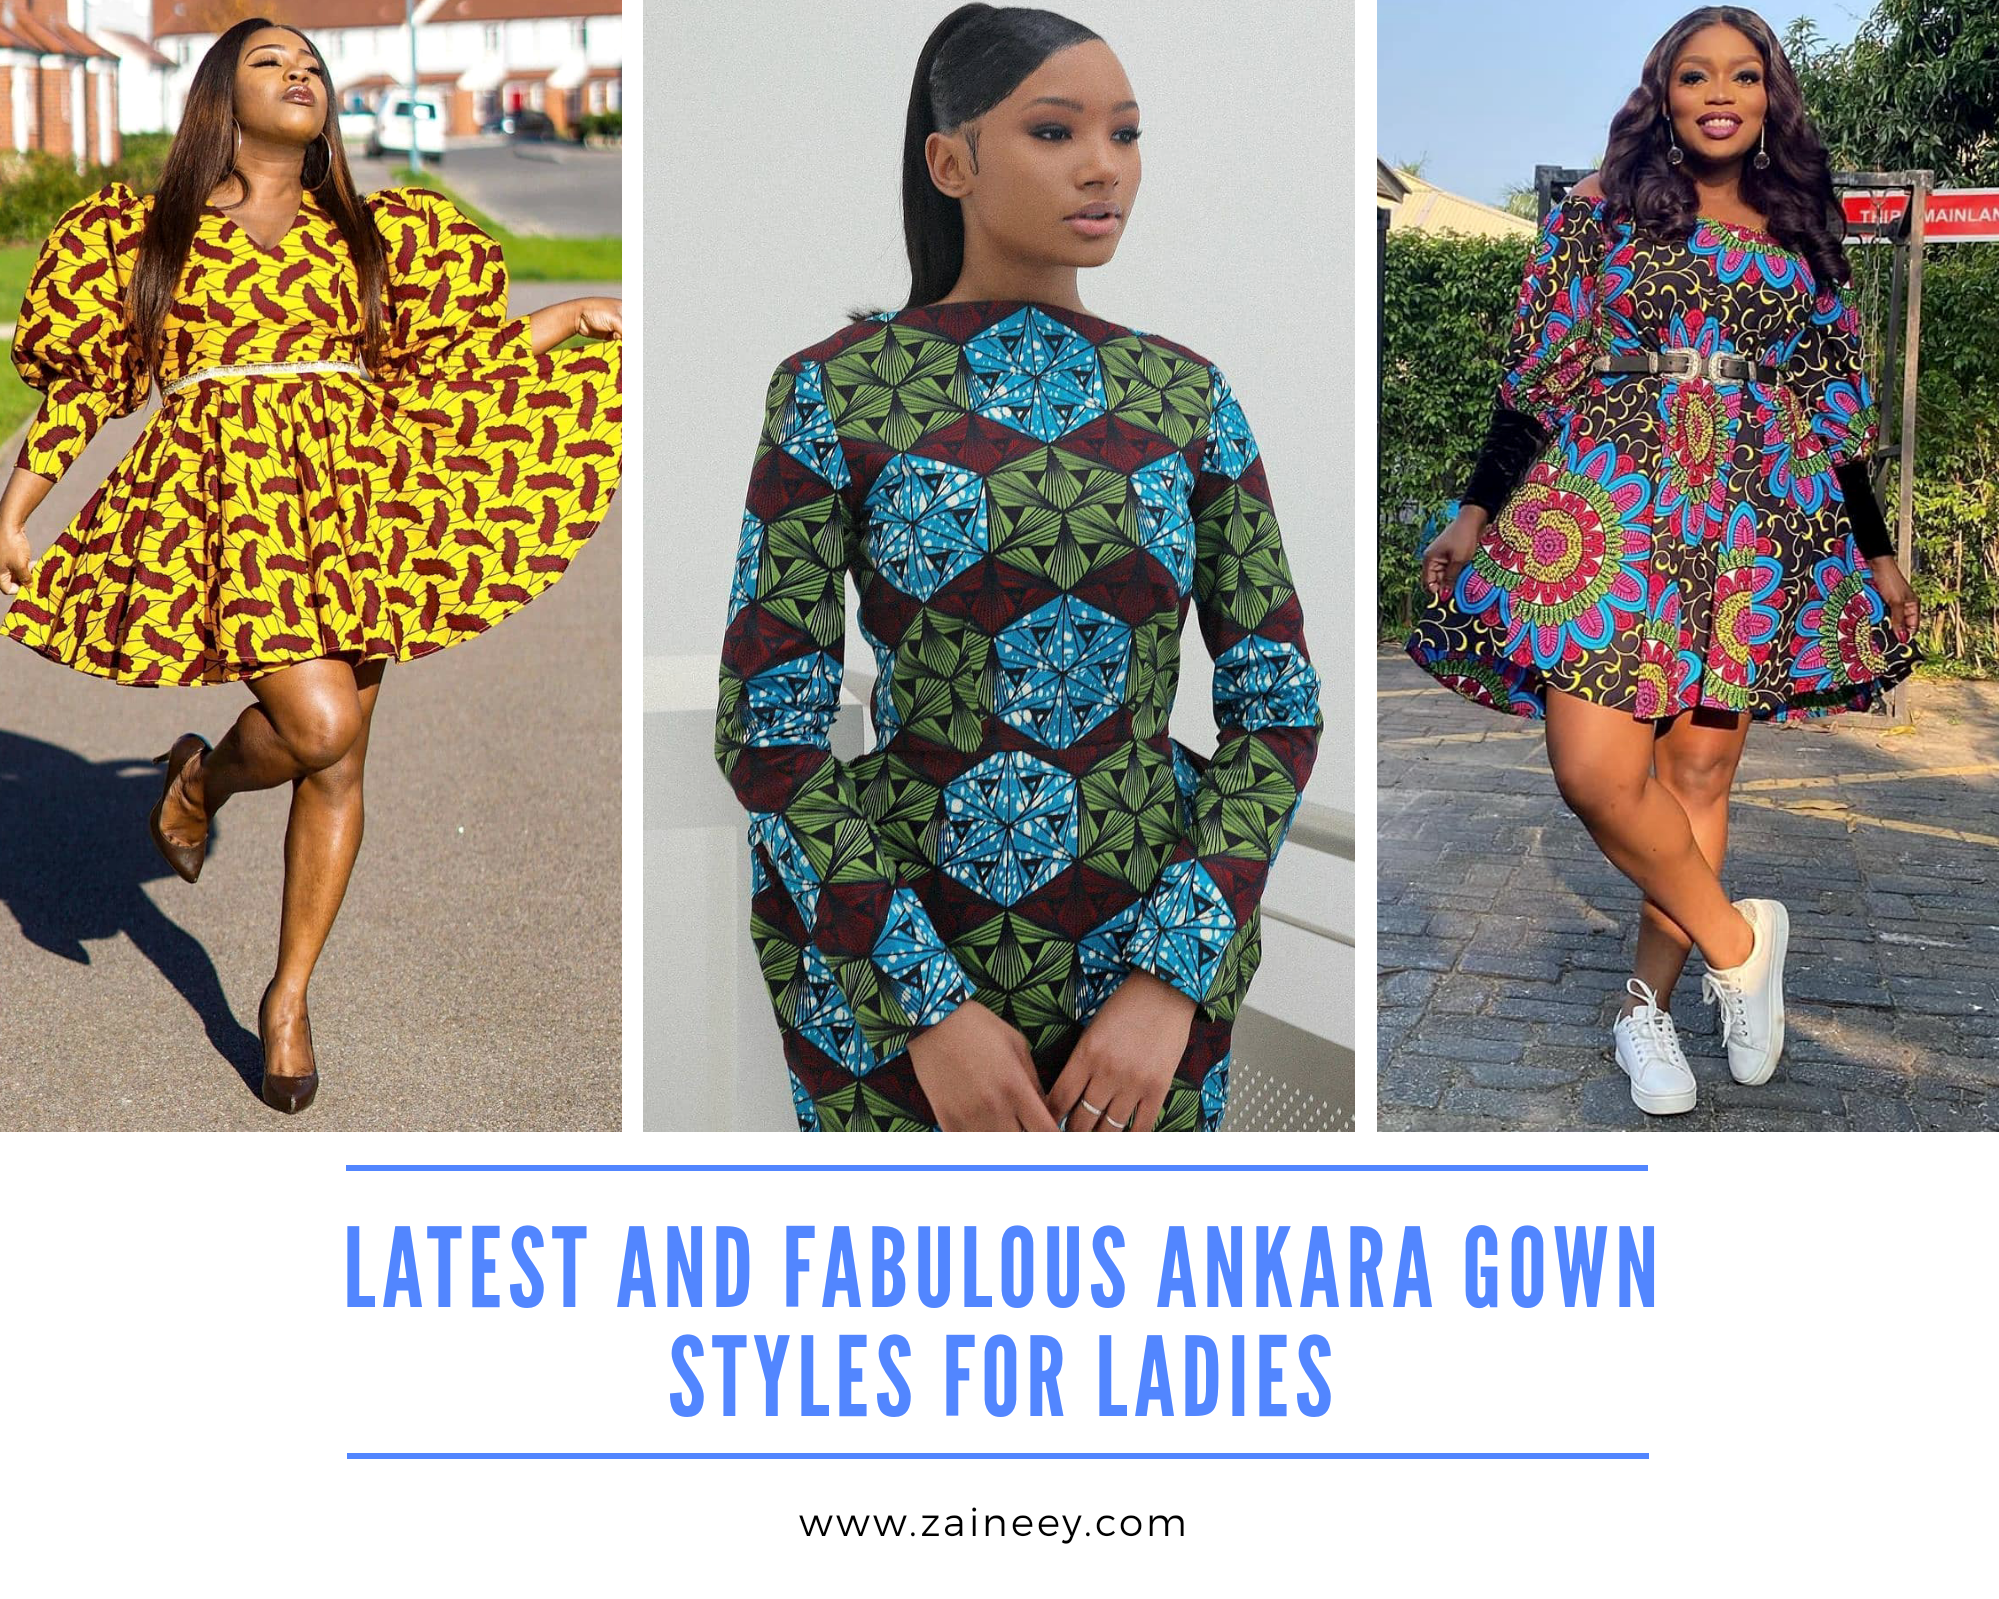 Latest and Fabulous Ankara Gown Styles for Ladies 2021 - African Dress Inspirations